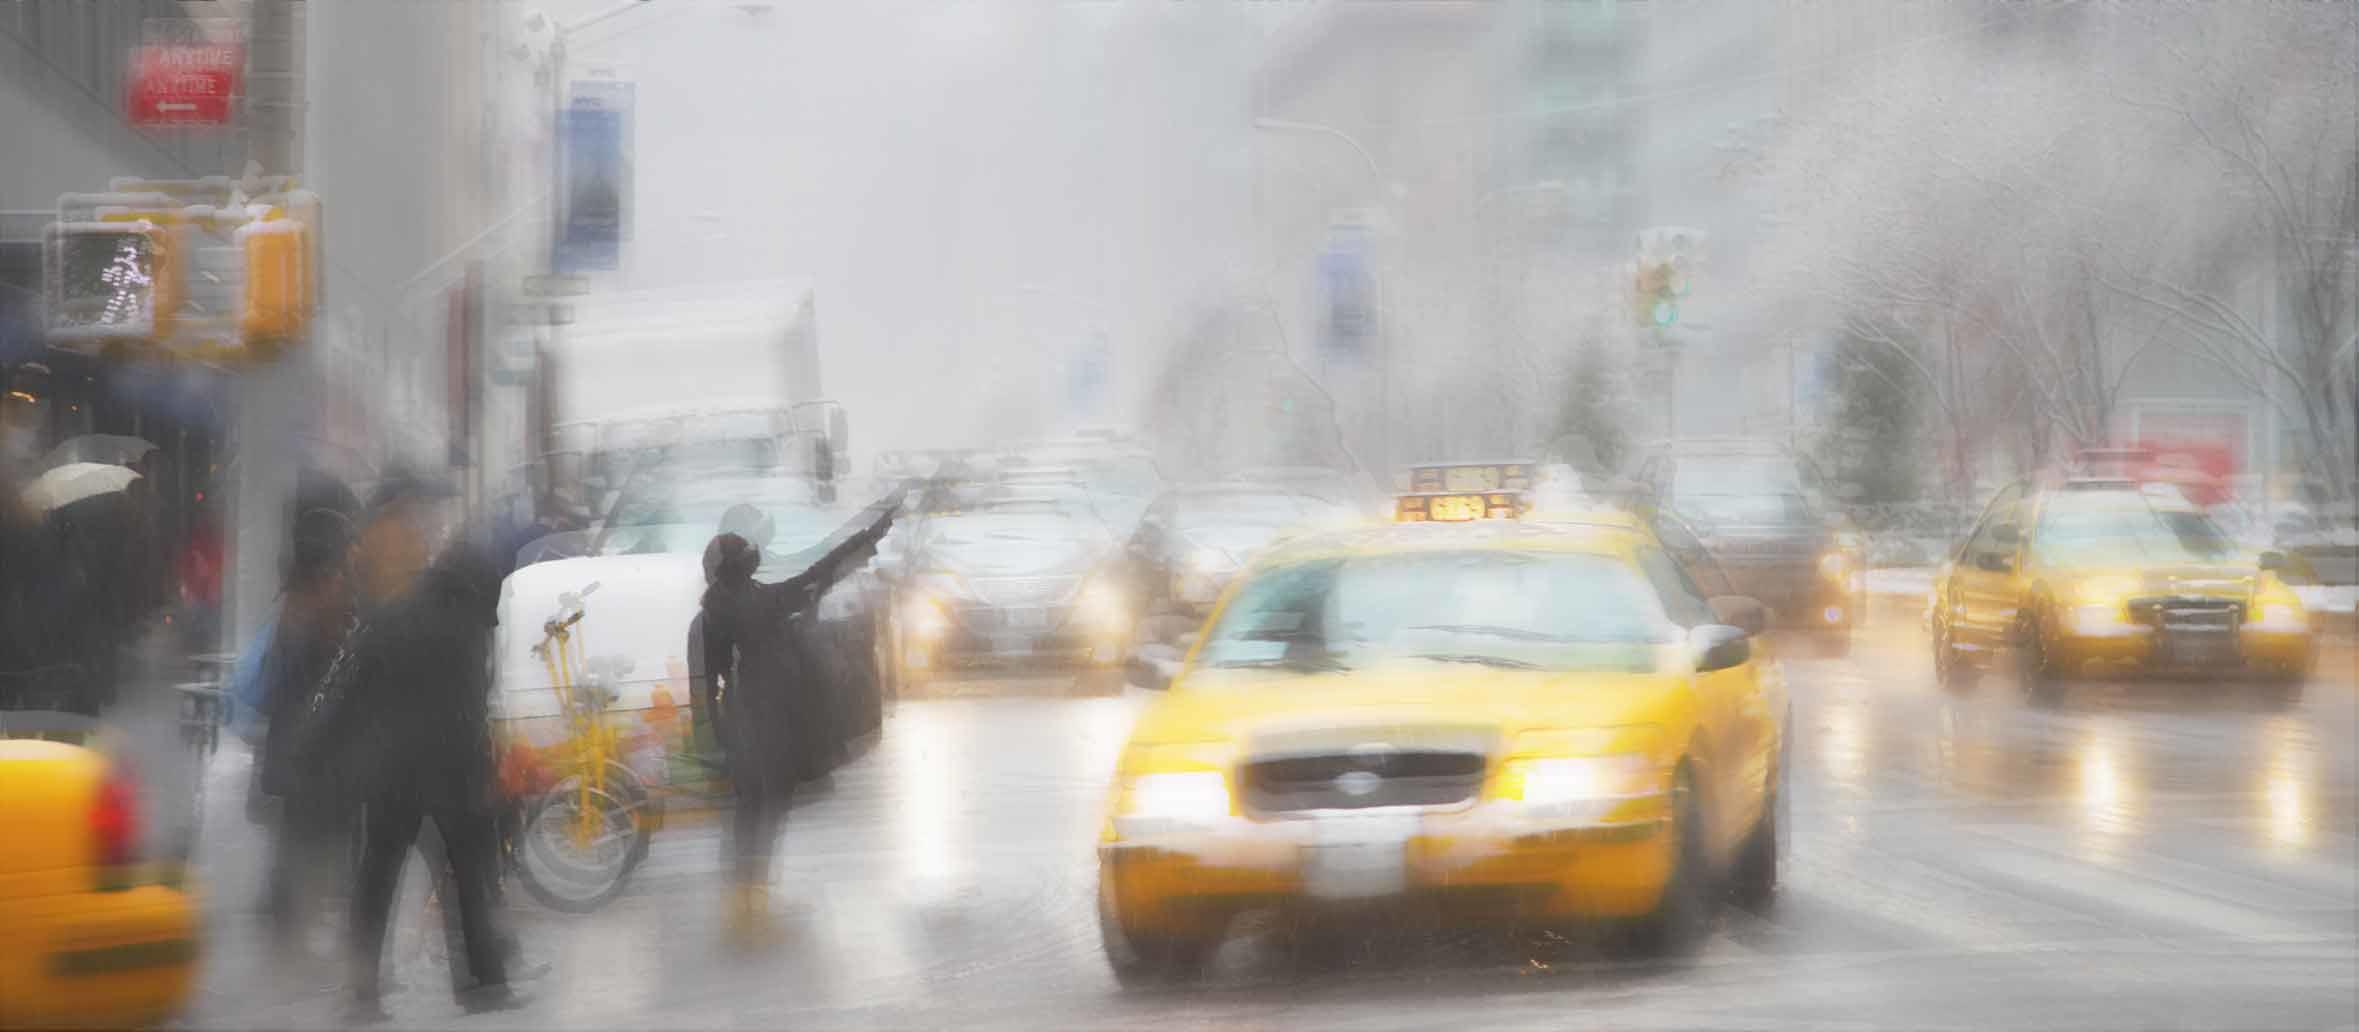 A rainy and busy day in the city blurred to simulate vision with fogged over glasses lenses.